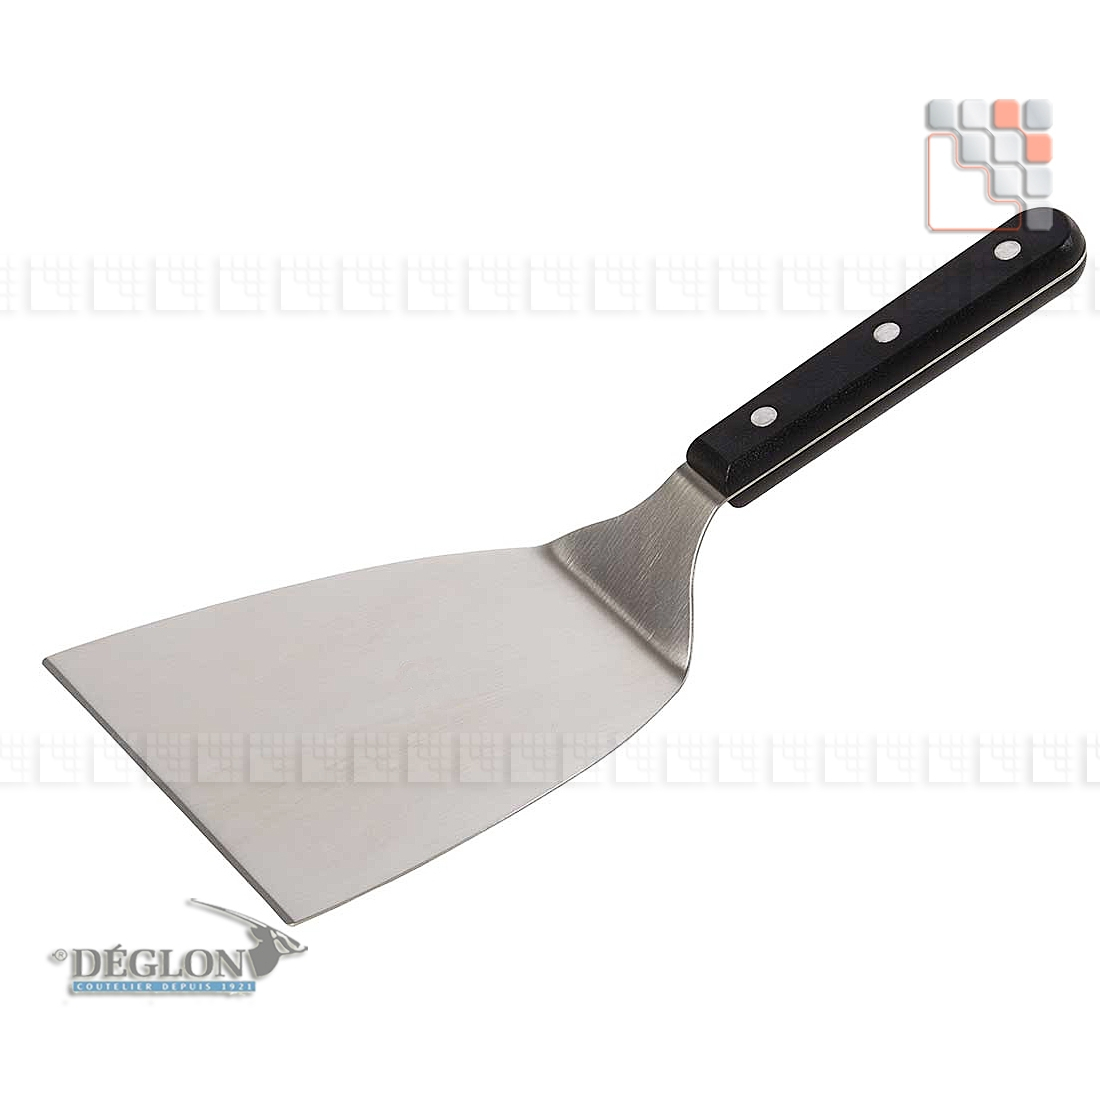 Stainless steel elbow spatula for plancha E07-SP150 ENO sas Accessoires and stainless steel wooden trolleys